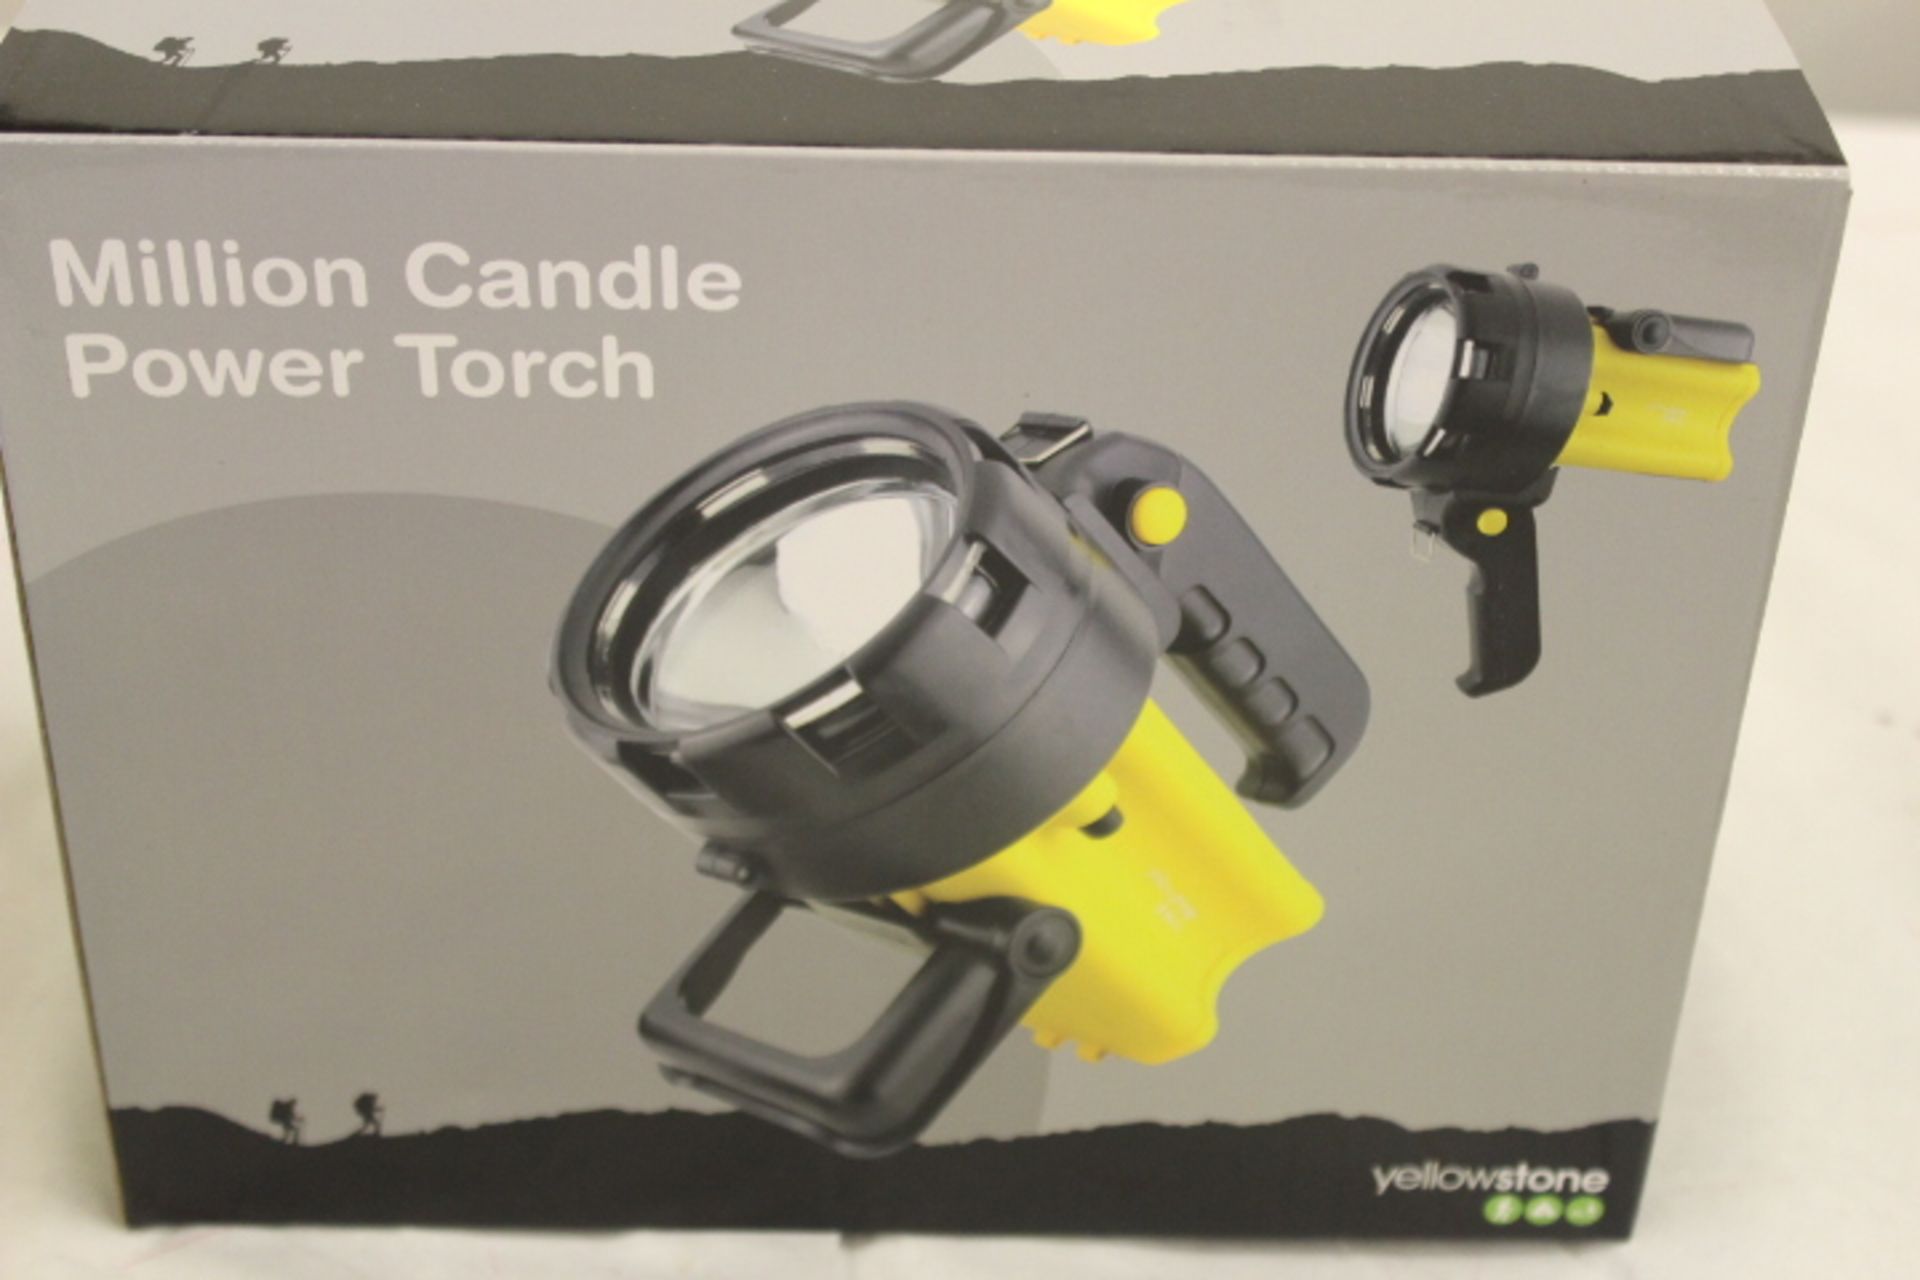 V Million Candle Re-chargable Power Torch RRP £34.99 - Weatherproof - Foot Stand - Carry Strap - 12v - Image 3 of 3